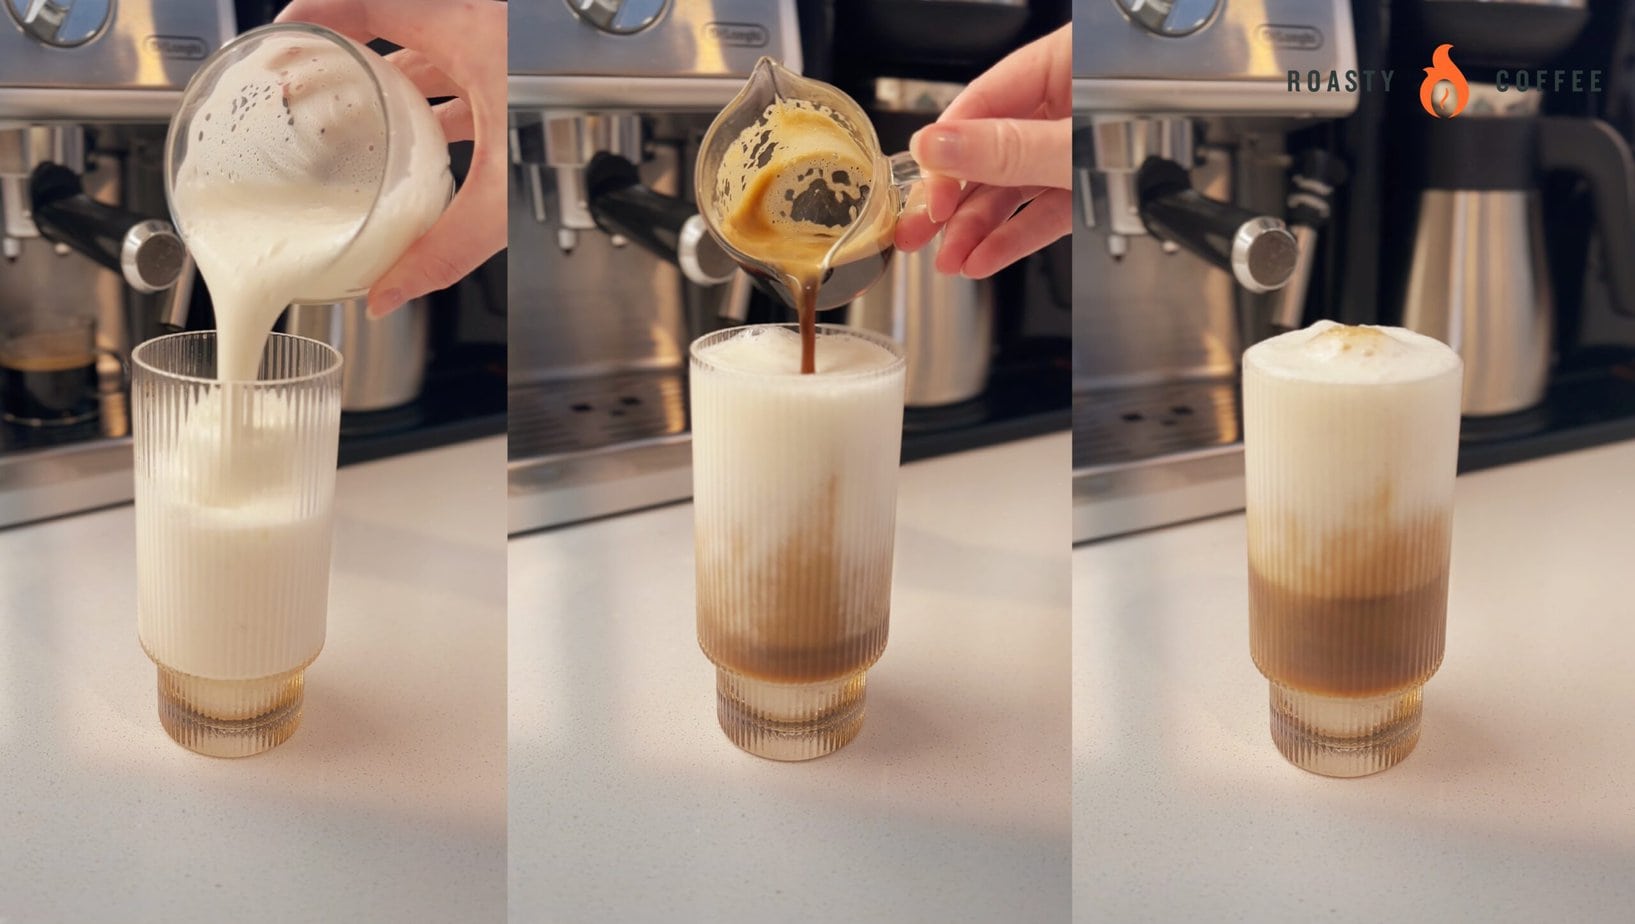 adding milk and coffee in one glass